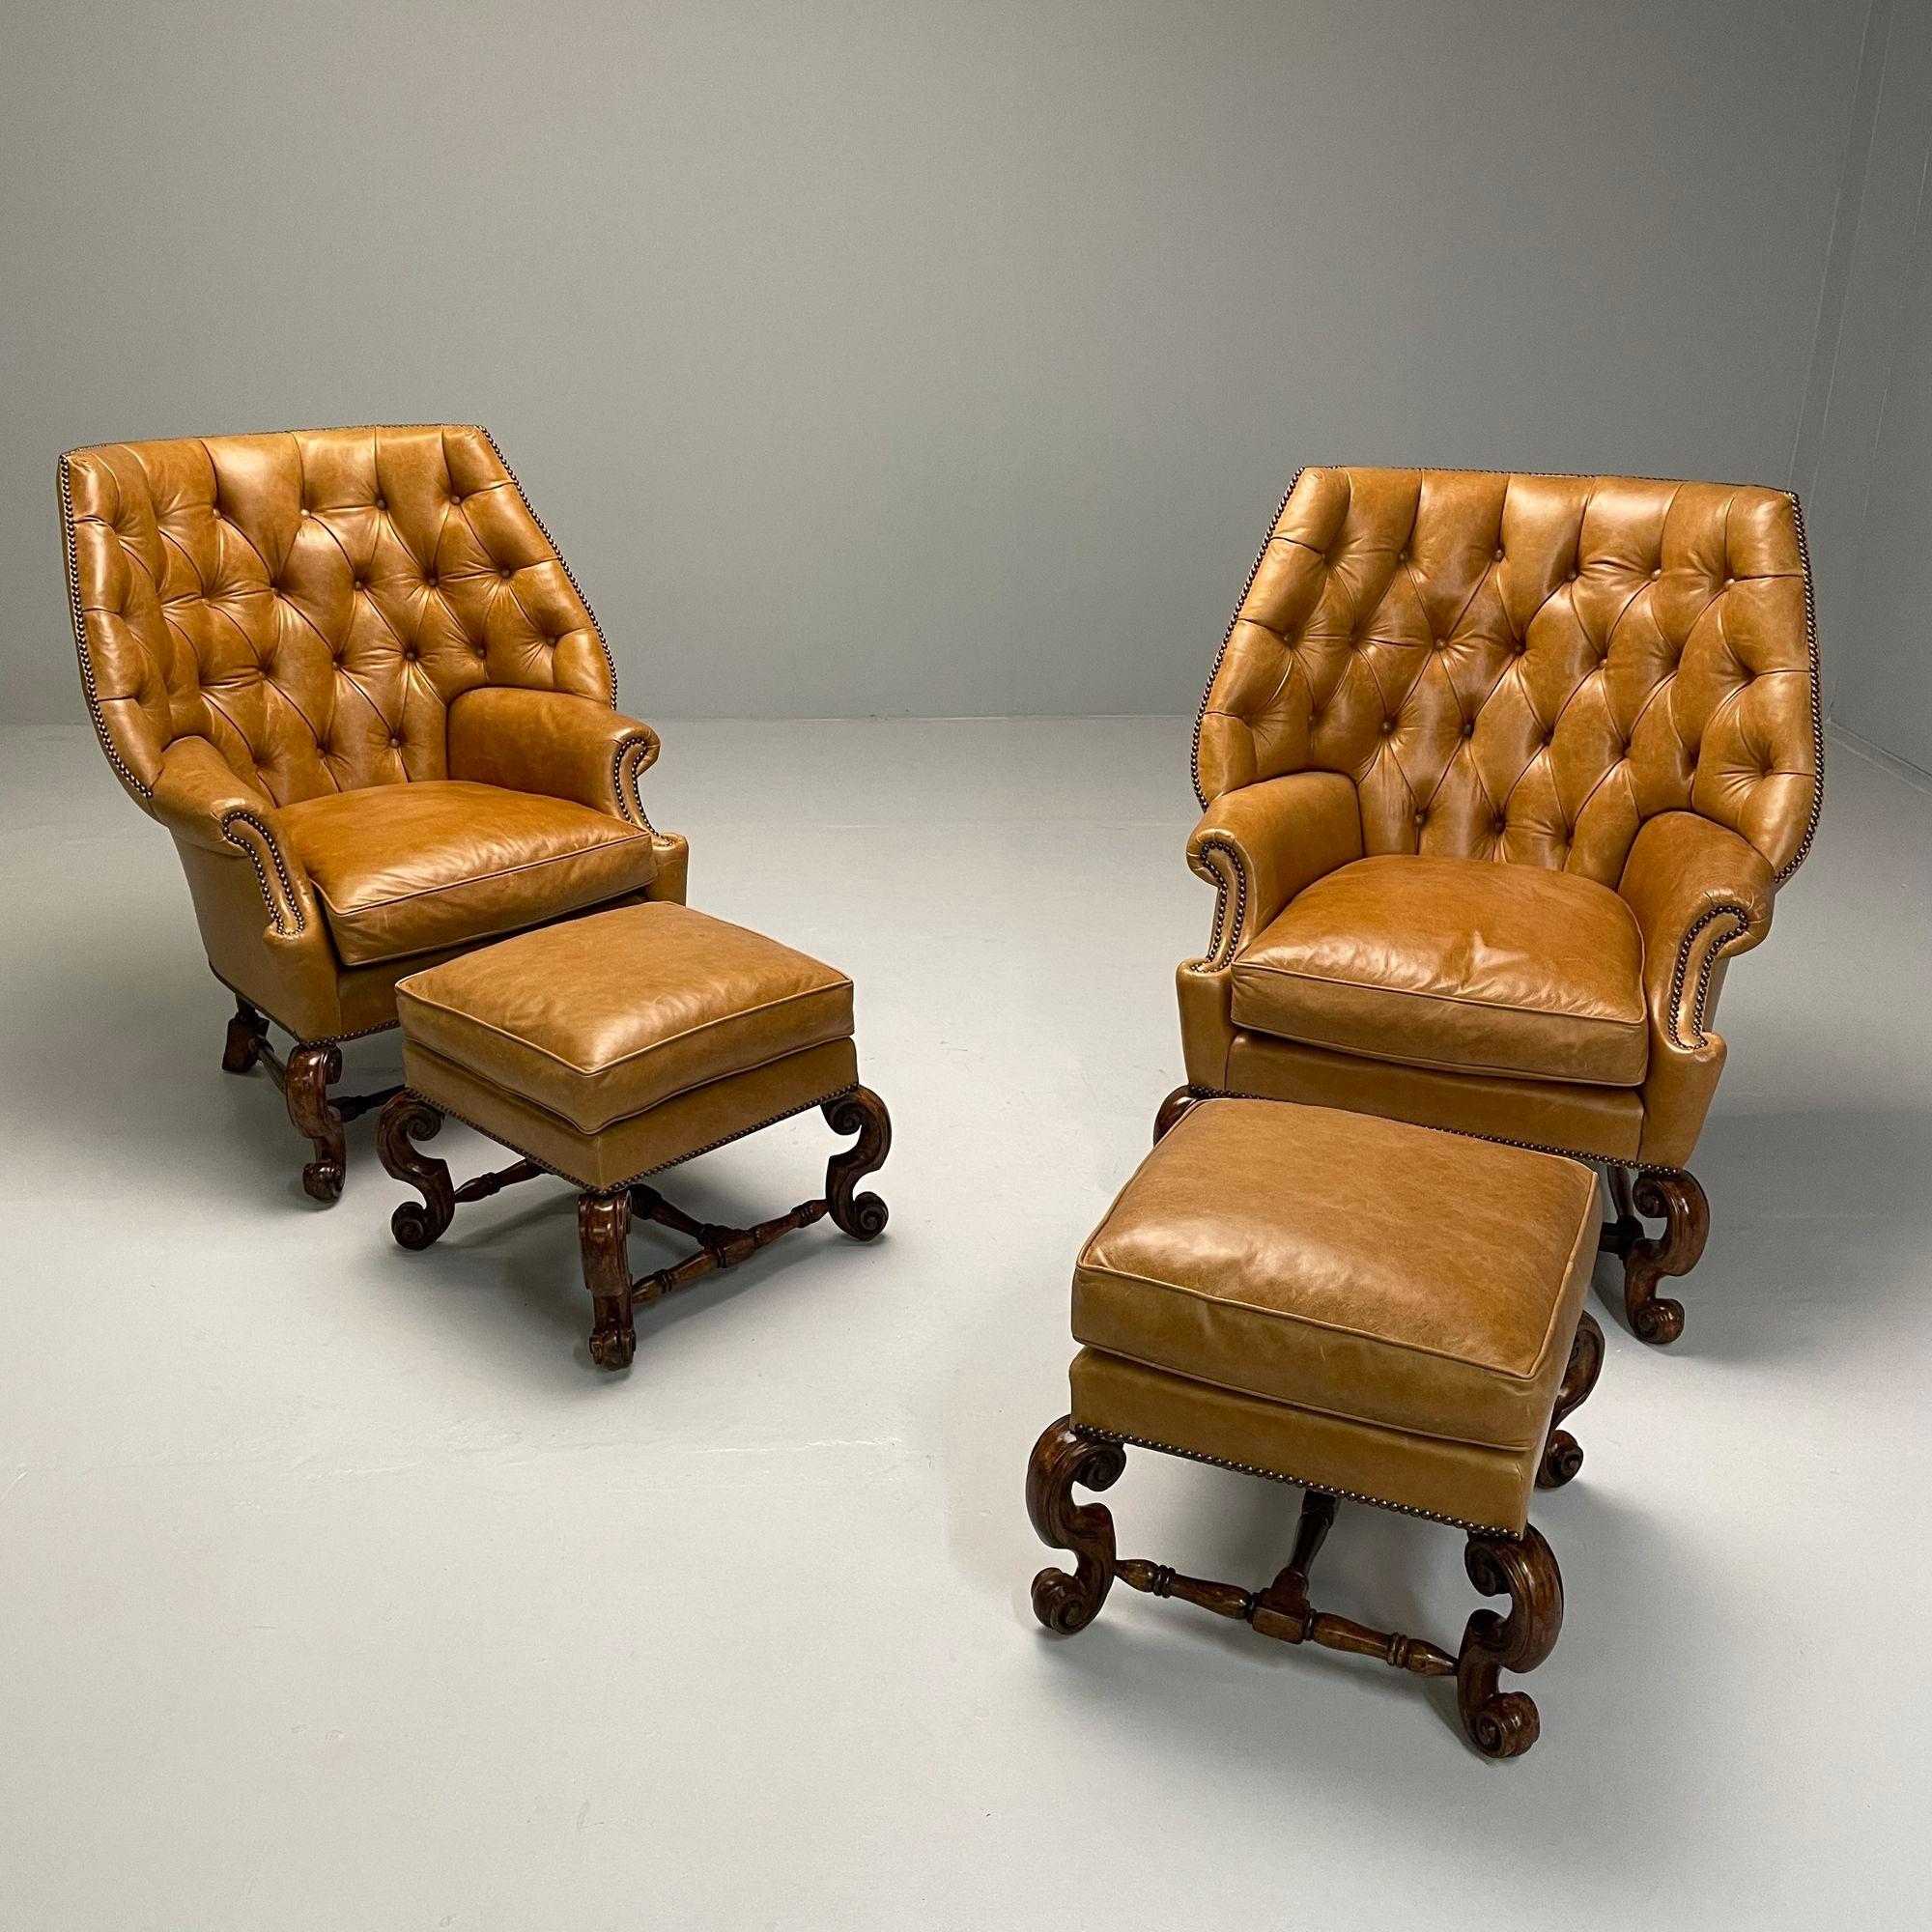 Georgian, Large Lounge Chairs, Ottomans, Tan Leather, USA 2000s

Pair of large tufted back leather armchairs with two matching ottomans. These arm chairs have generous, ensconcing backs, nail head detailing and removable seat cushions. Each chair